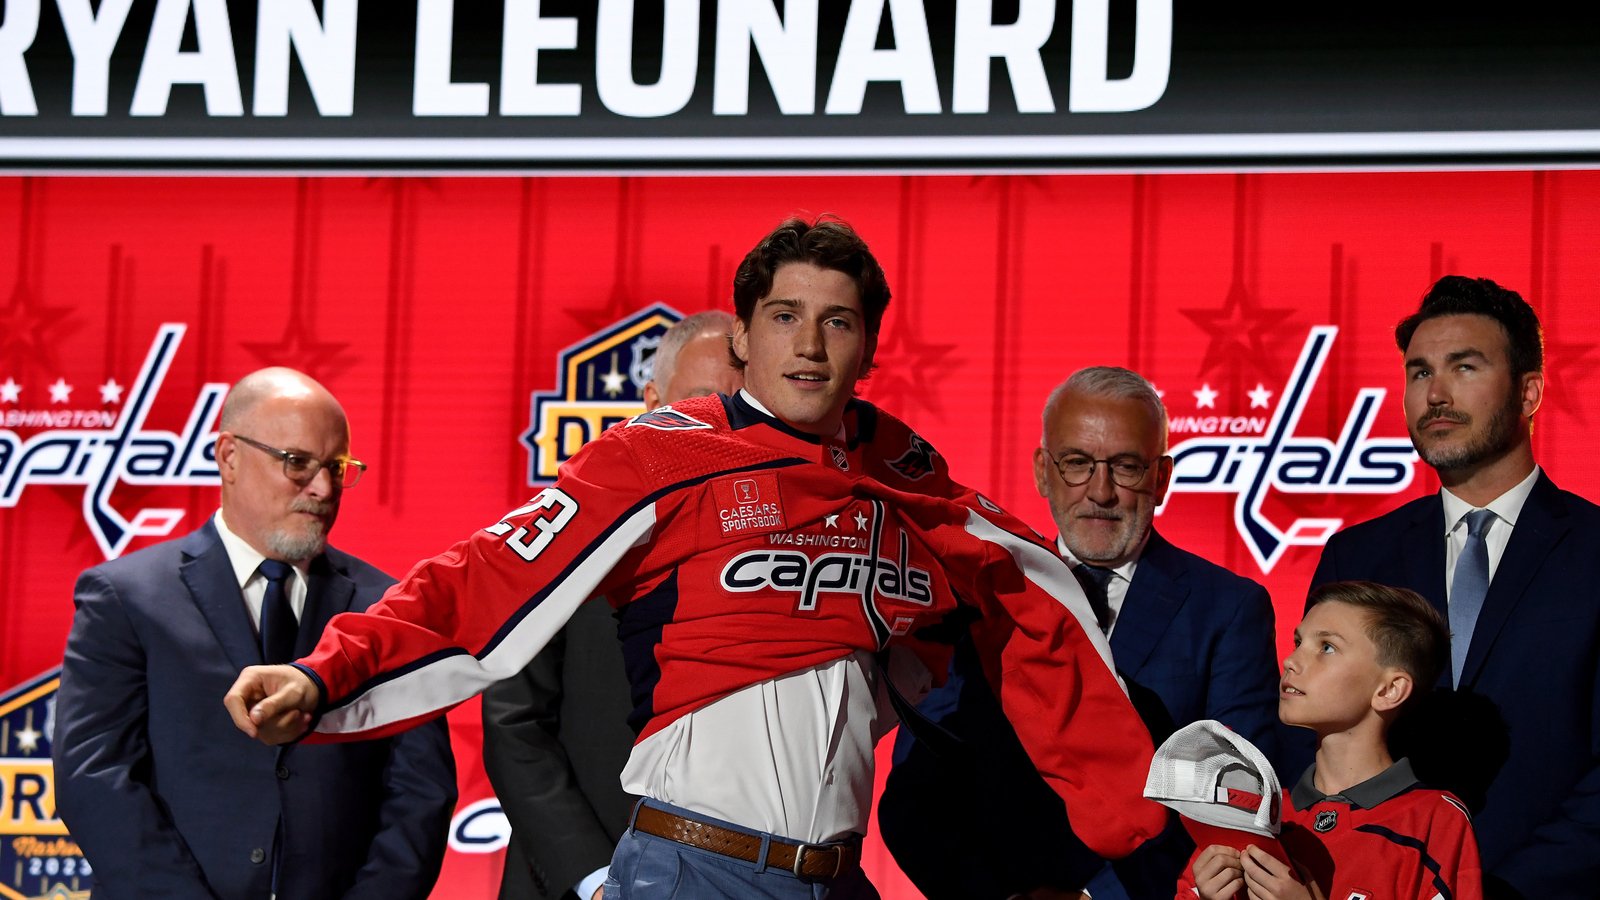 2023-24 NHL Prospect Pool Overview: Washington Capitals - The